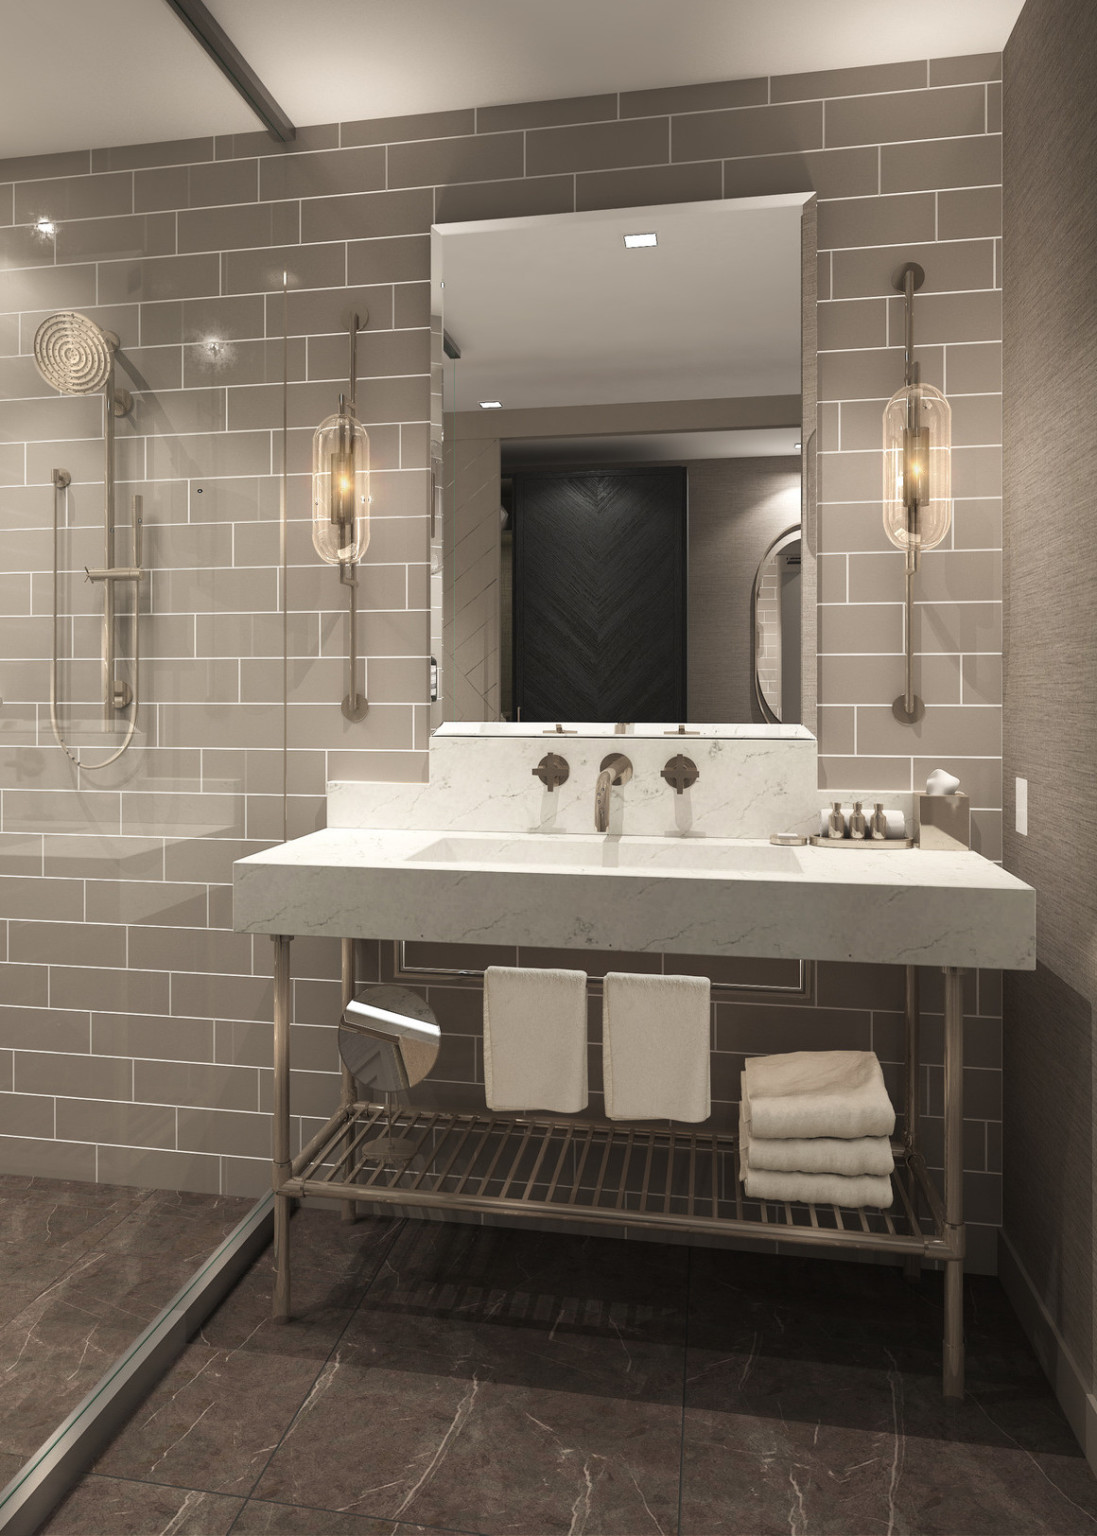 Grey tiled bathroom with marble sink over gold rack with towels. Mirror centered above between 2 oval lights on anchored rods